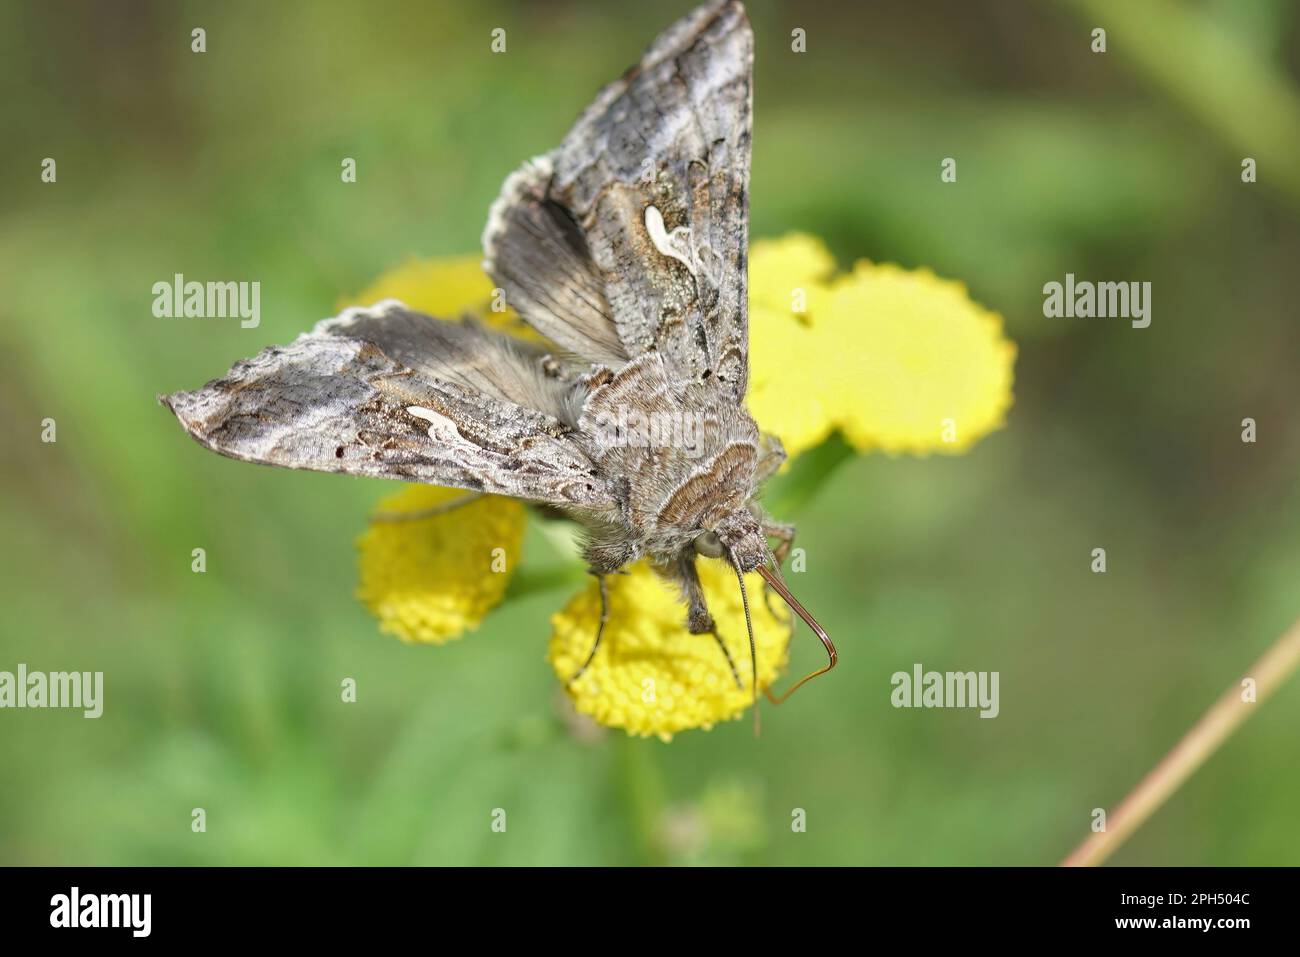 Natural close up of the brown Silver-Y moth, Autographa gamma drinking nectar from a yellow Tansy flower, Tanacetum vulgare Stock Photo